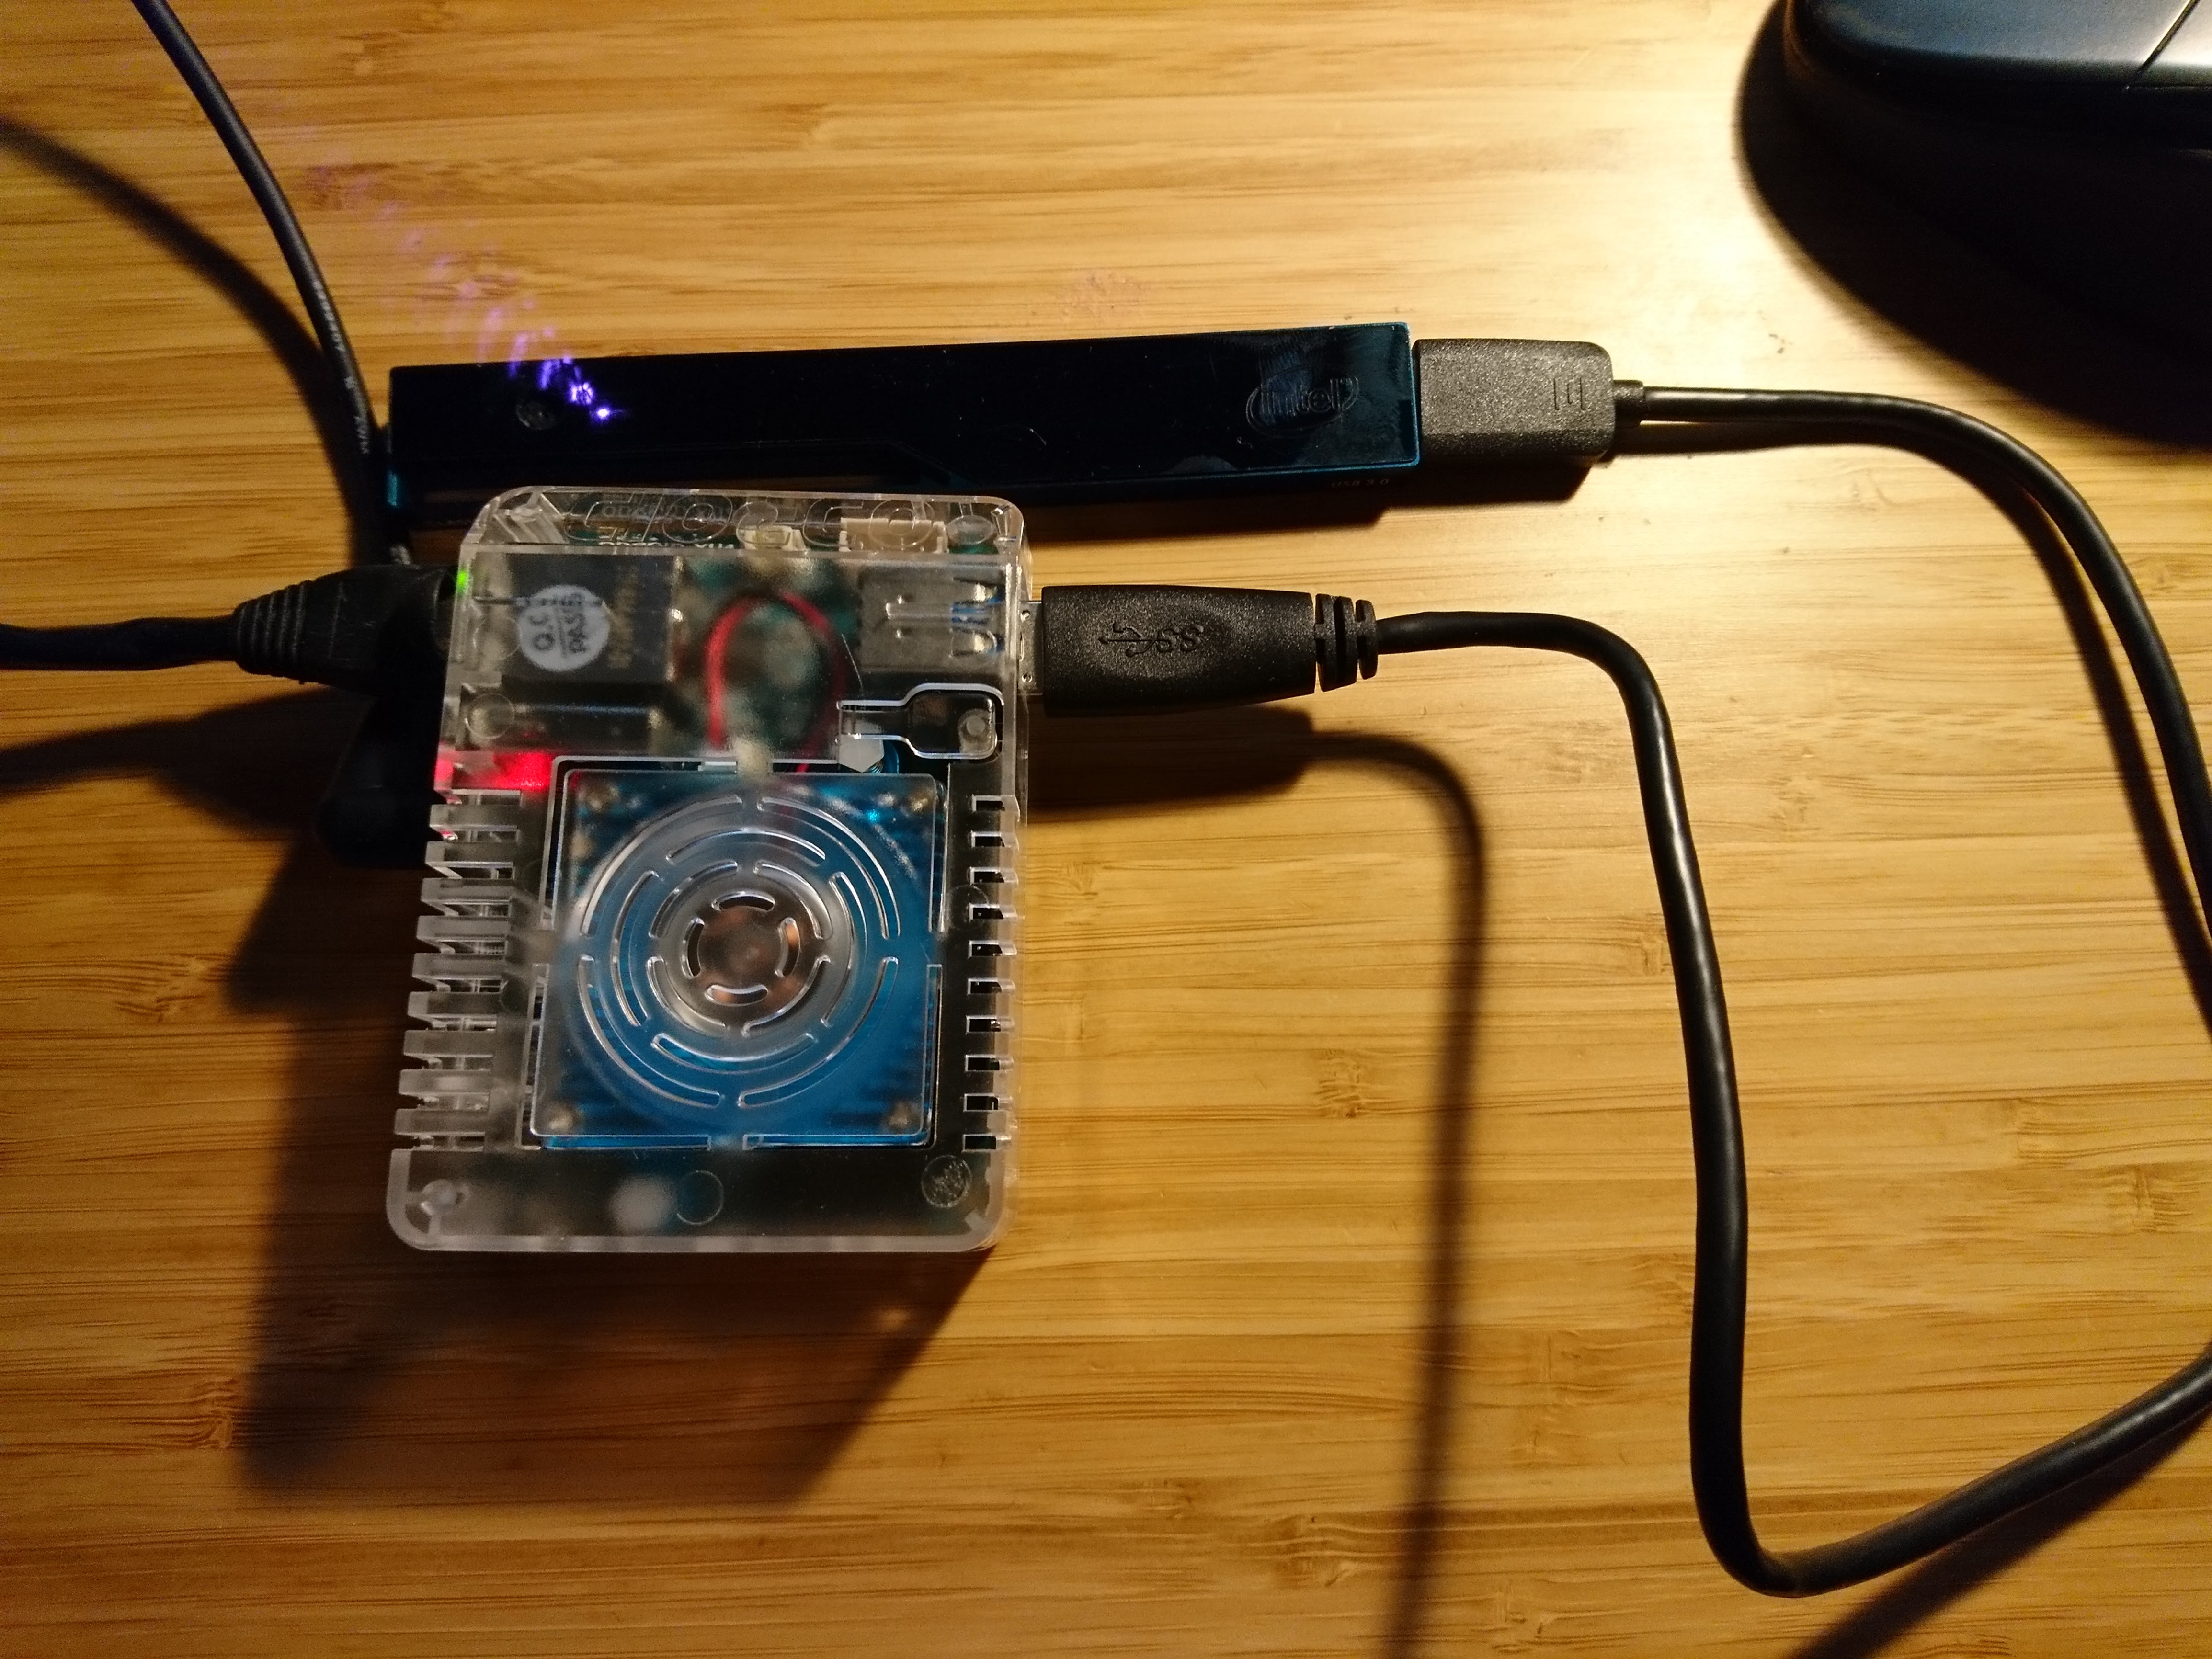 Setting up Realsense R200 on Odroid XU4 with ROS